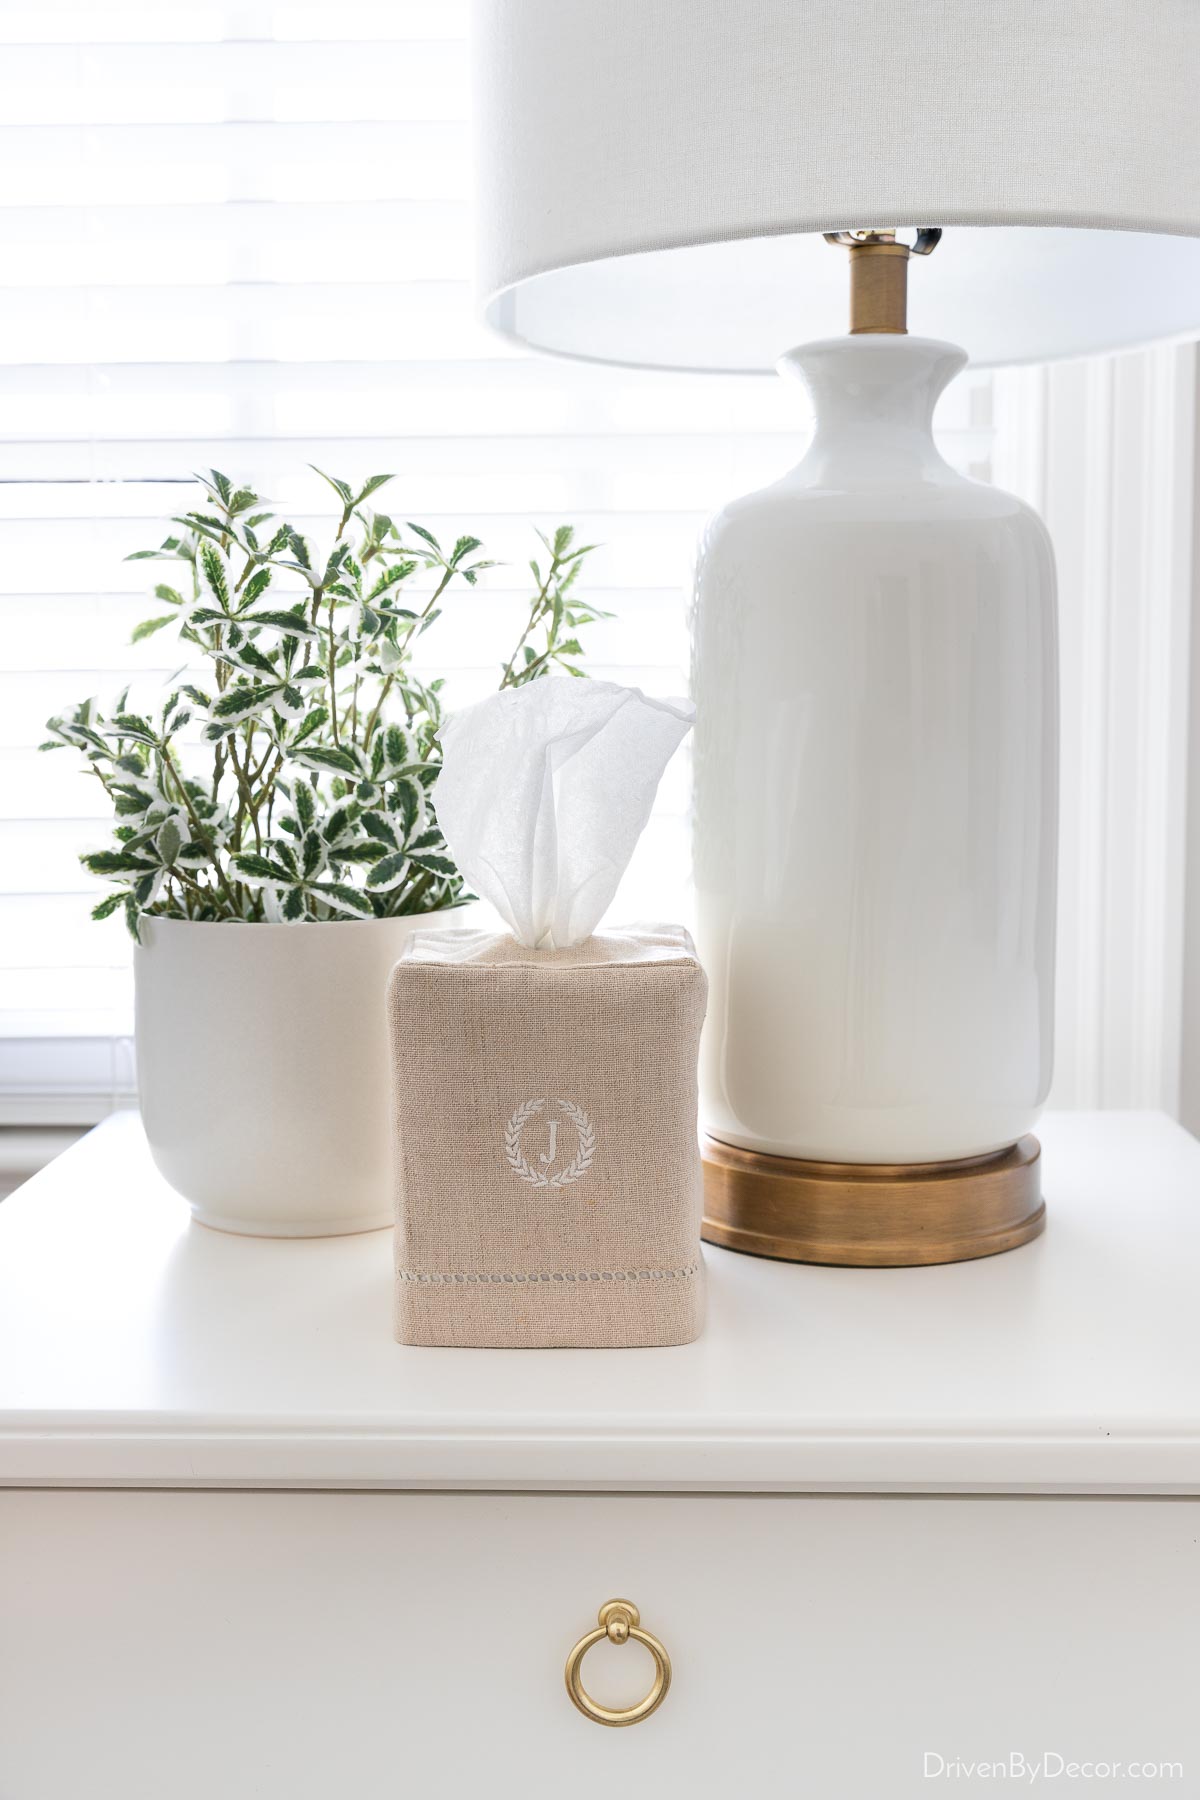 Tissue box with linen cover on nightstand